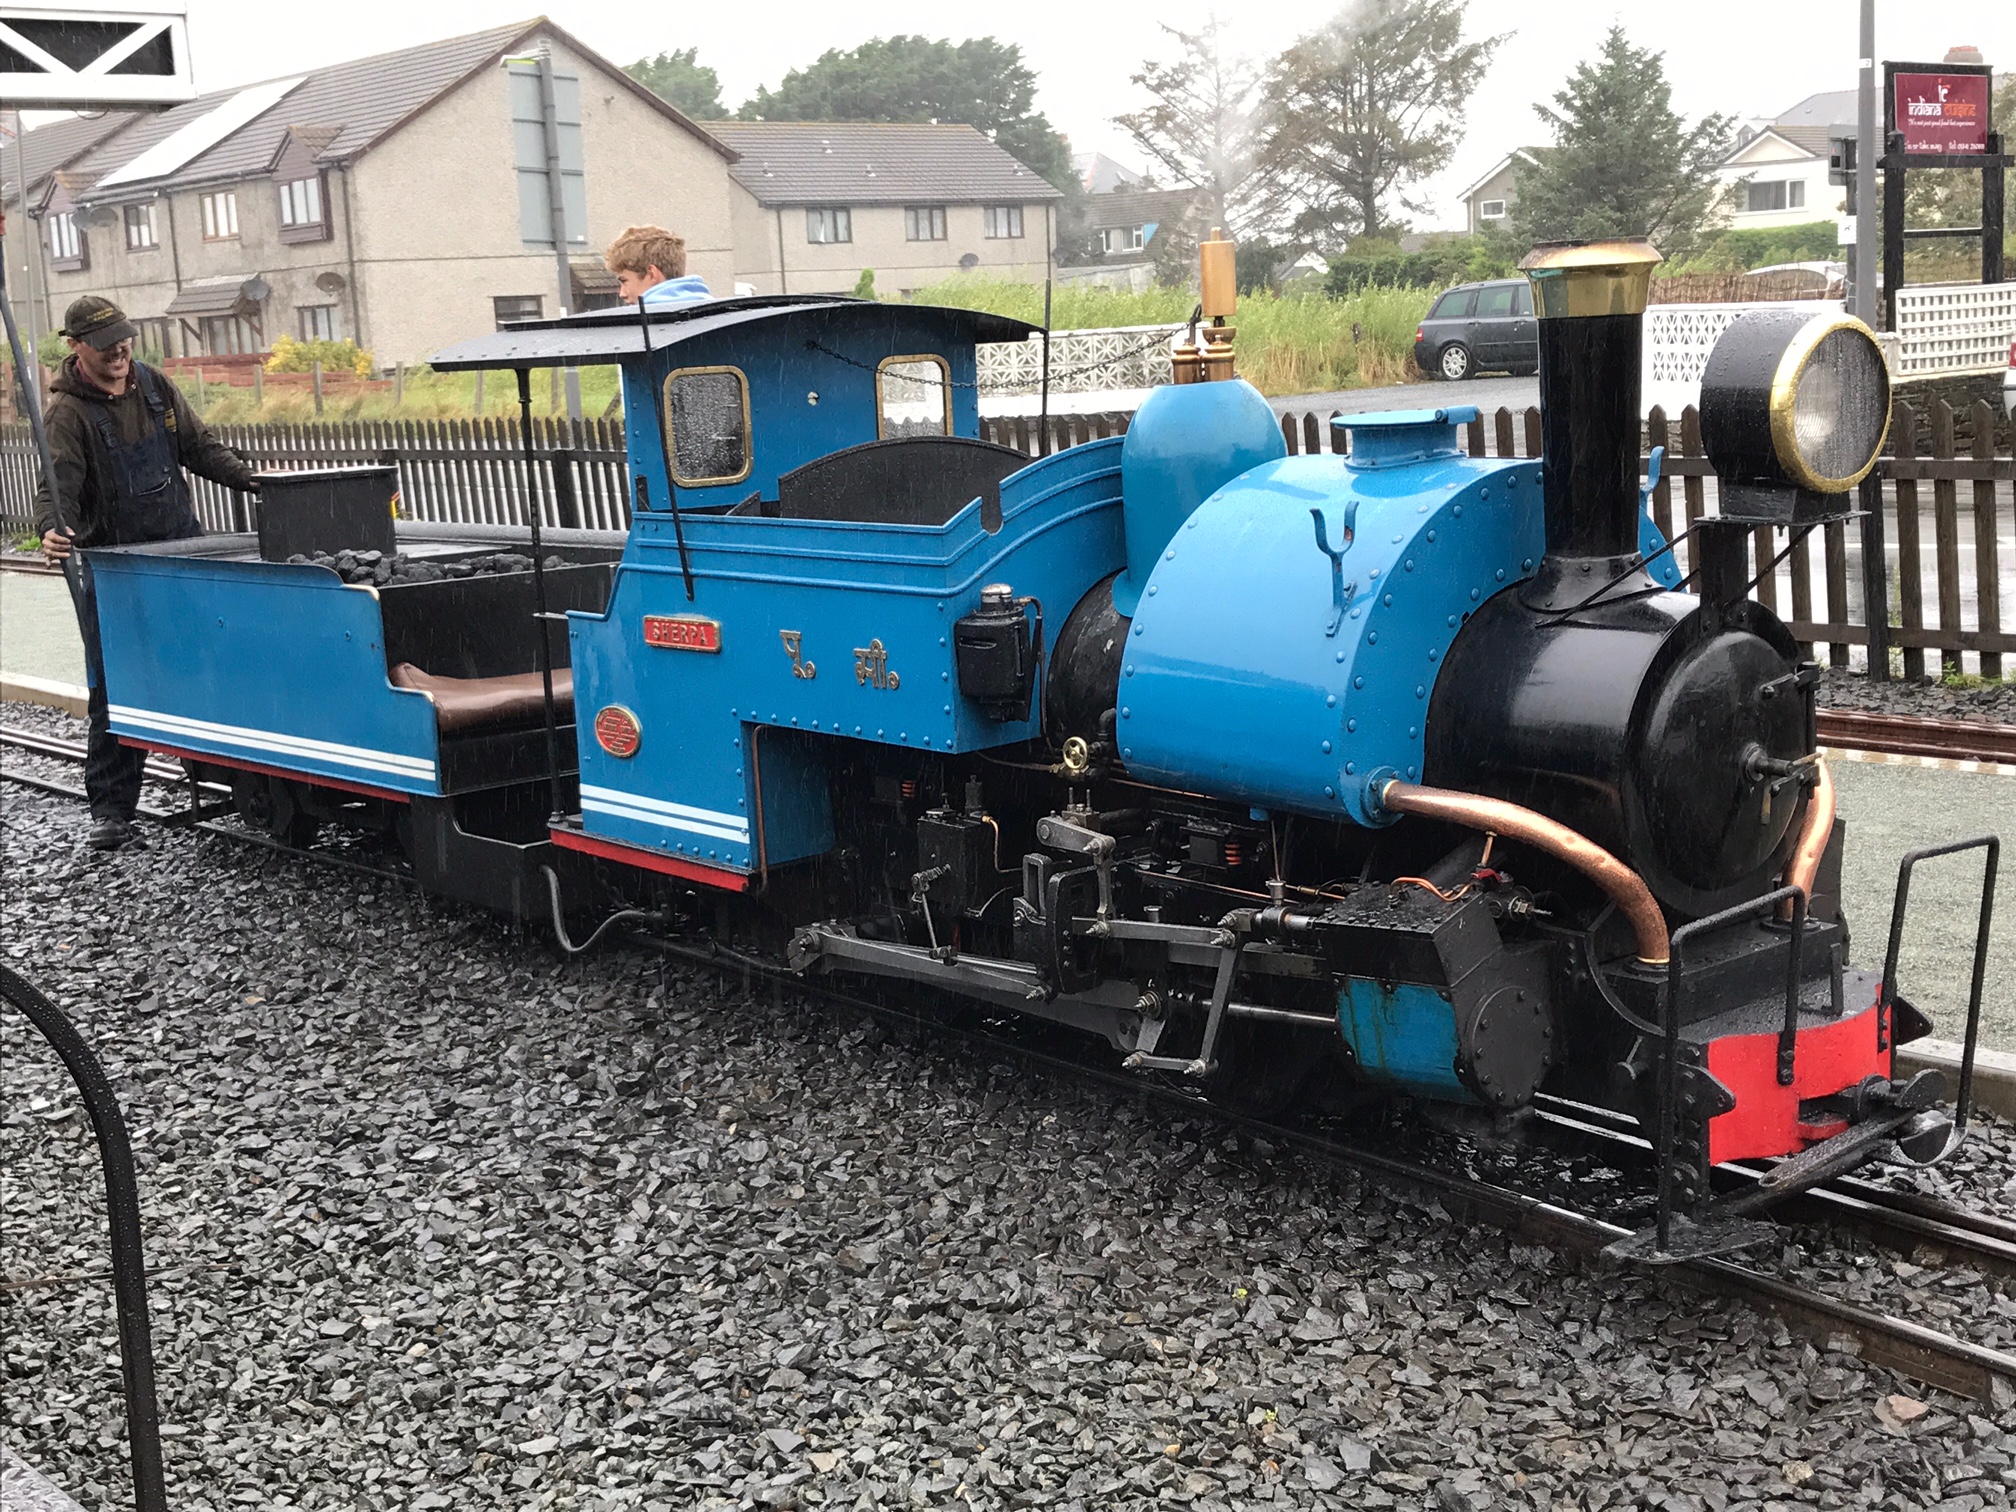 Great Little Trains of Wales: Can you "bump start" a steam locomotive?